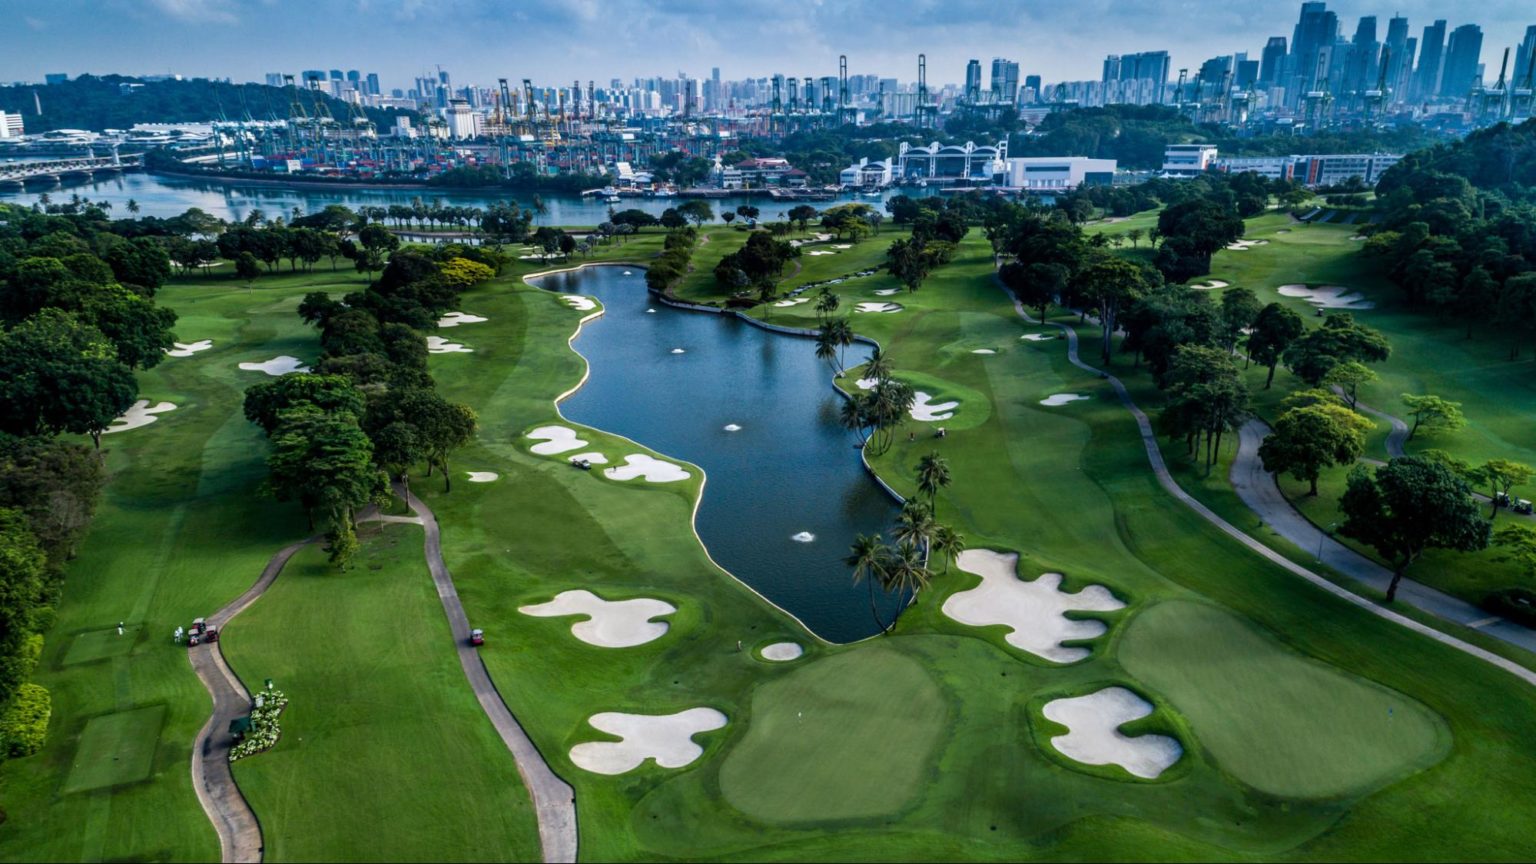 13 Golf Courses In Singapore Including Country Clubs & Driving Ranges